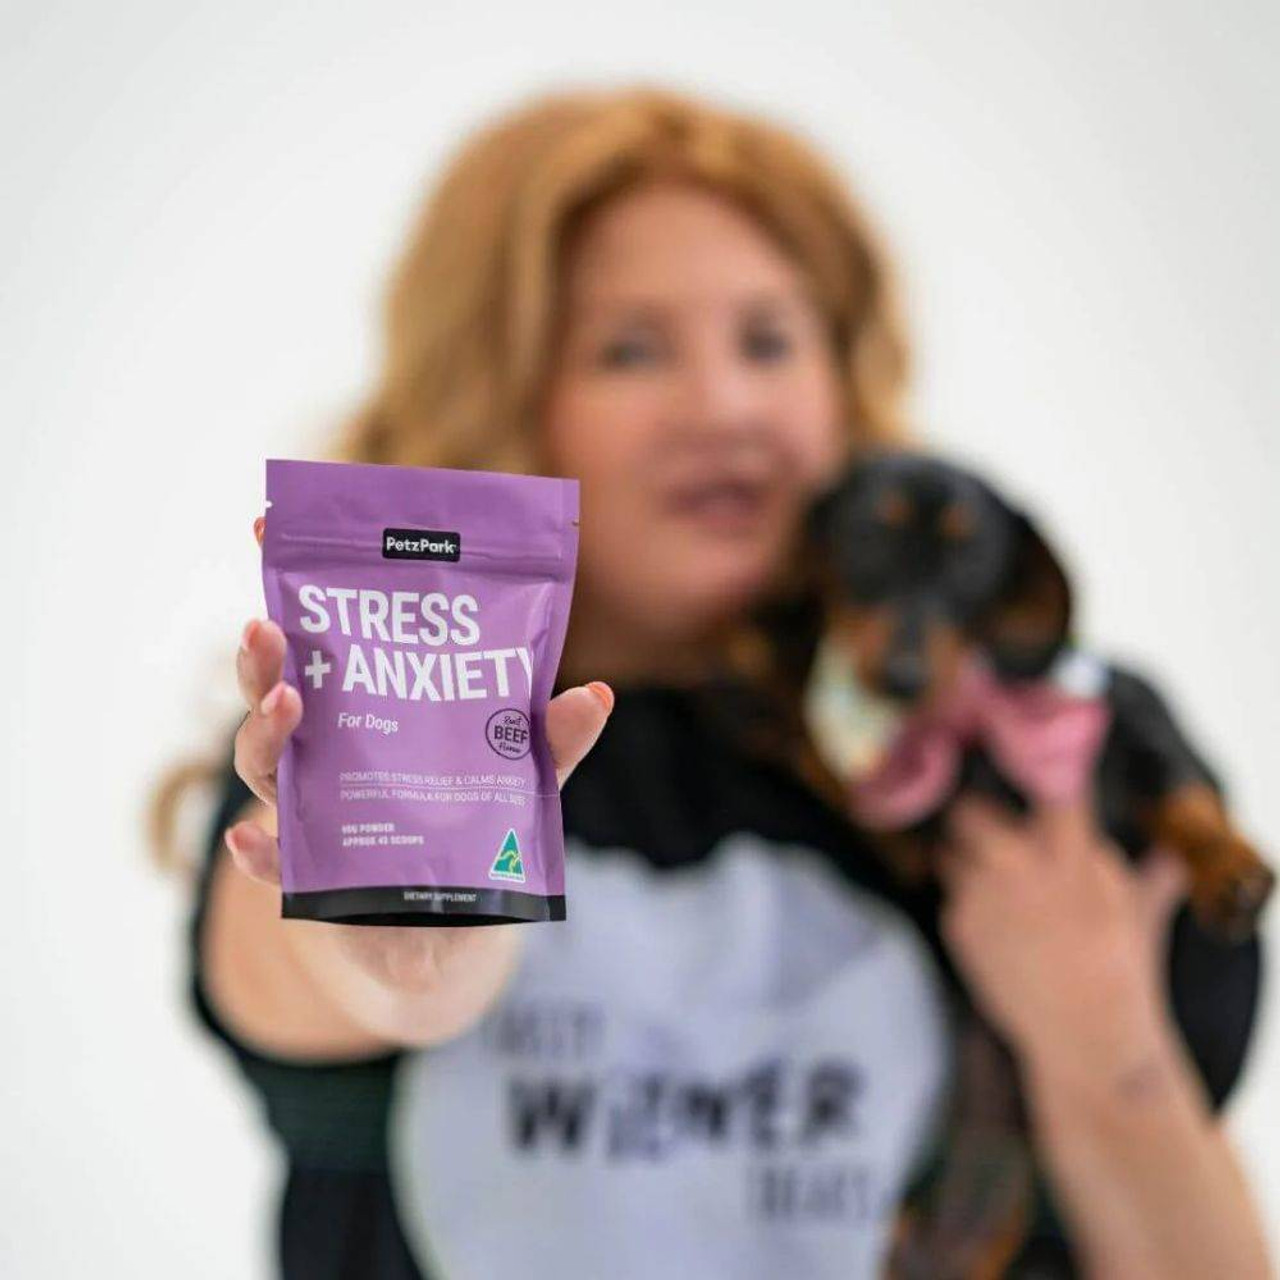 Petz Park Stress Anxiety Powder For Dogs Roast Beef Flavour